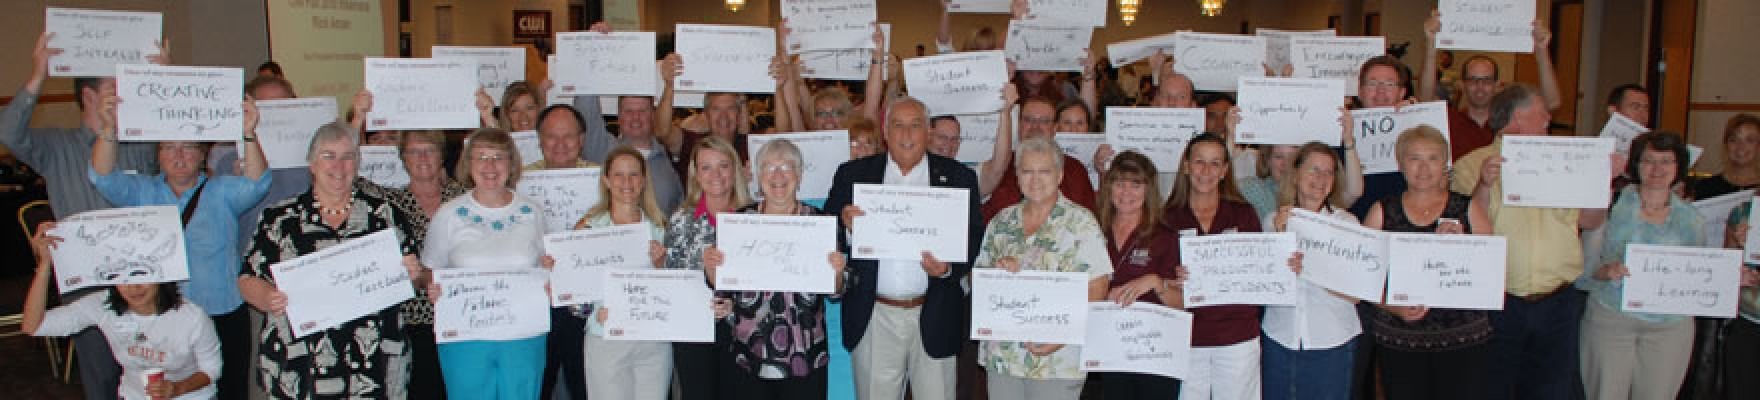 Large group of CWI employees with signs saying why they donate to scholarships.